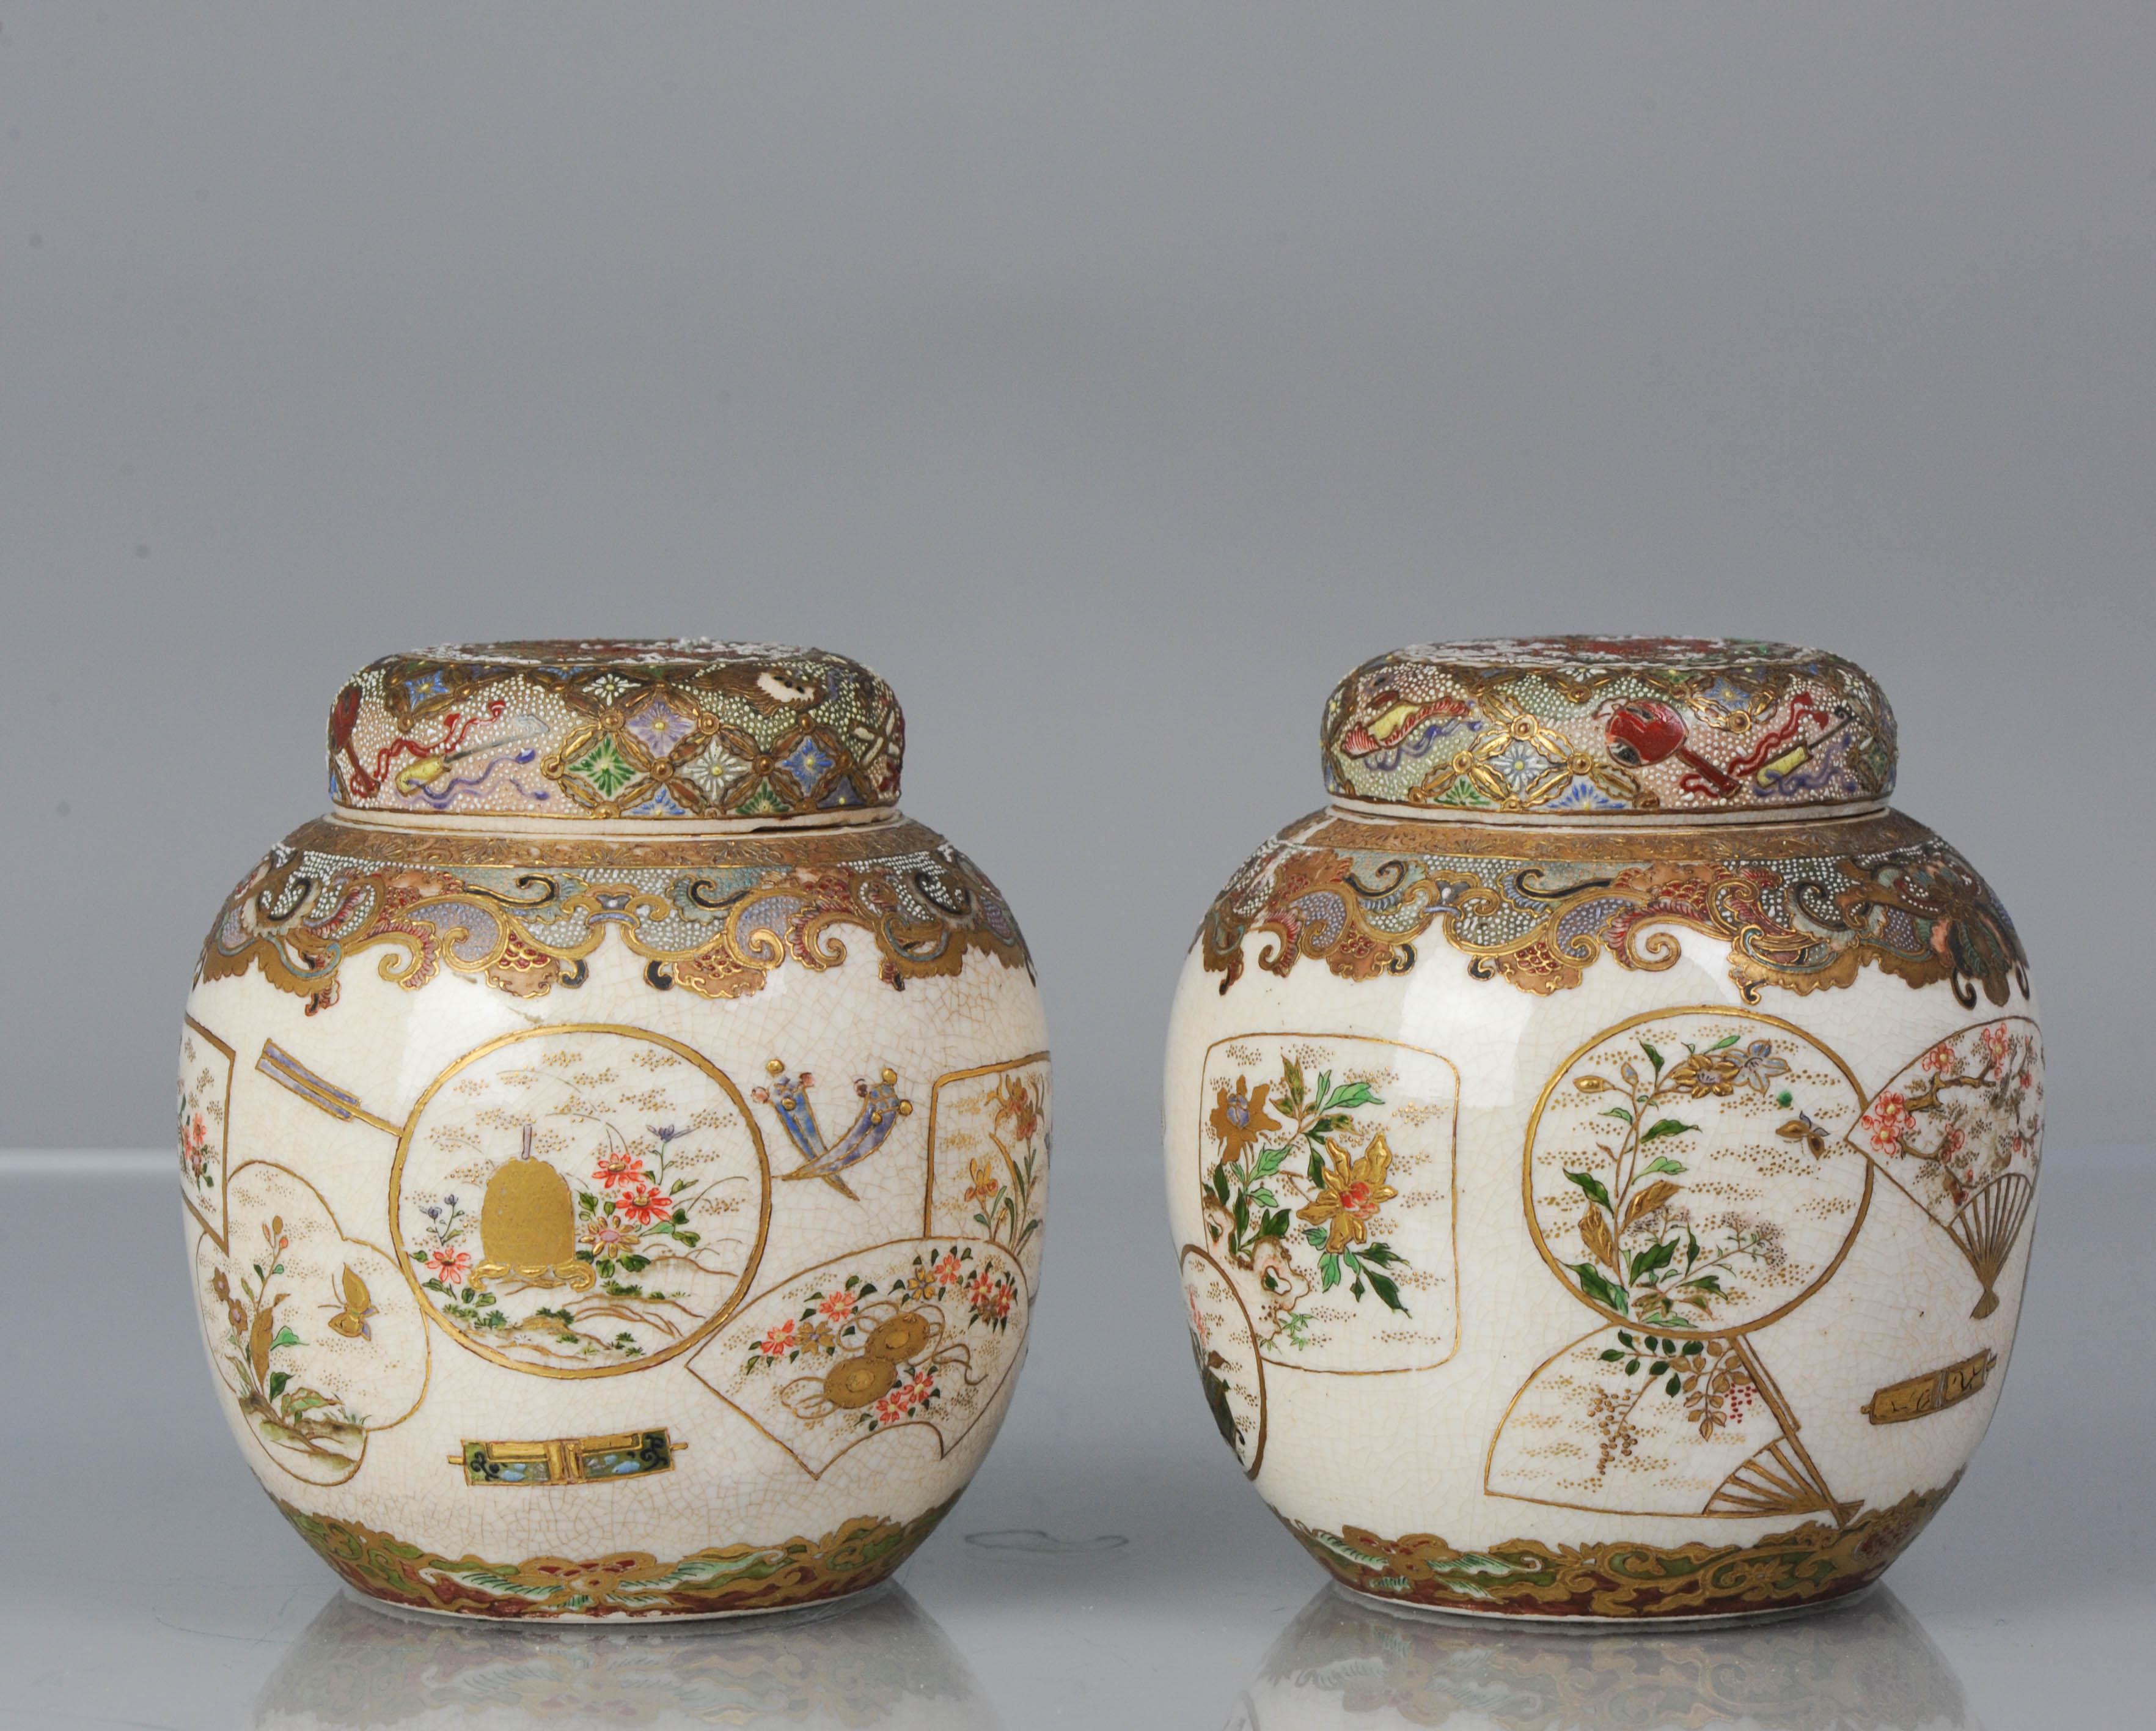 Description

A pair of Japanese Satsuma jars, Meiji Period. Incredible and very detailed piece. Just superb

Unmarked


Condition
Both perfect. Size 110 x 100 mm H X D

Period
Meiji Periode.